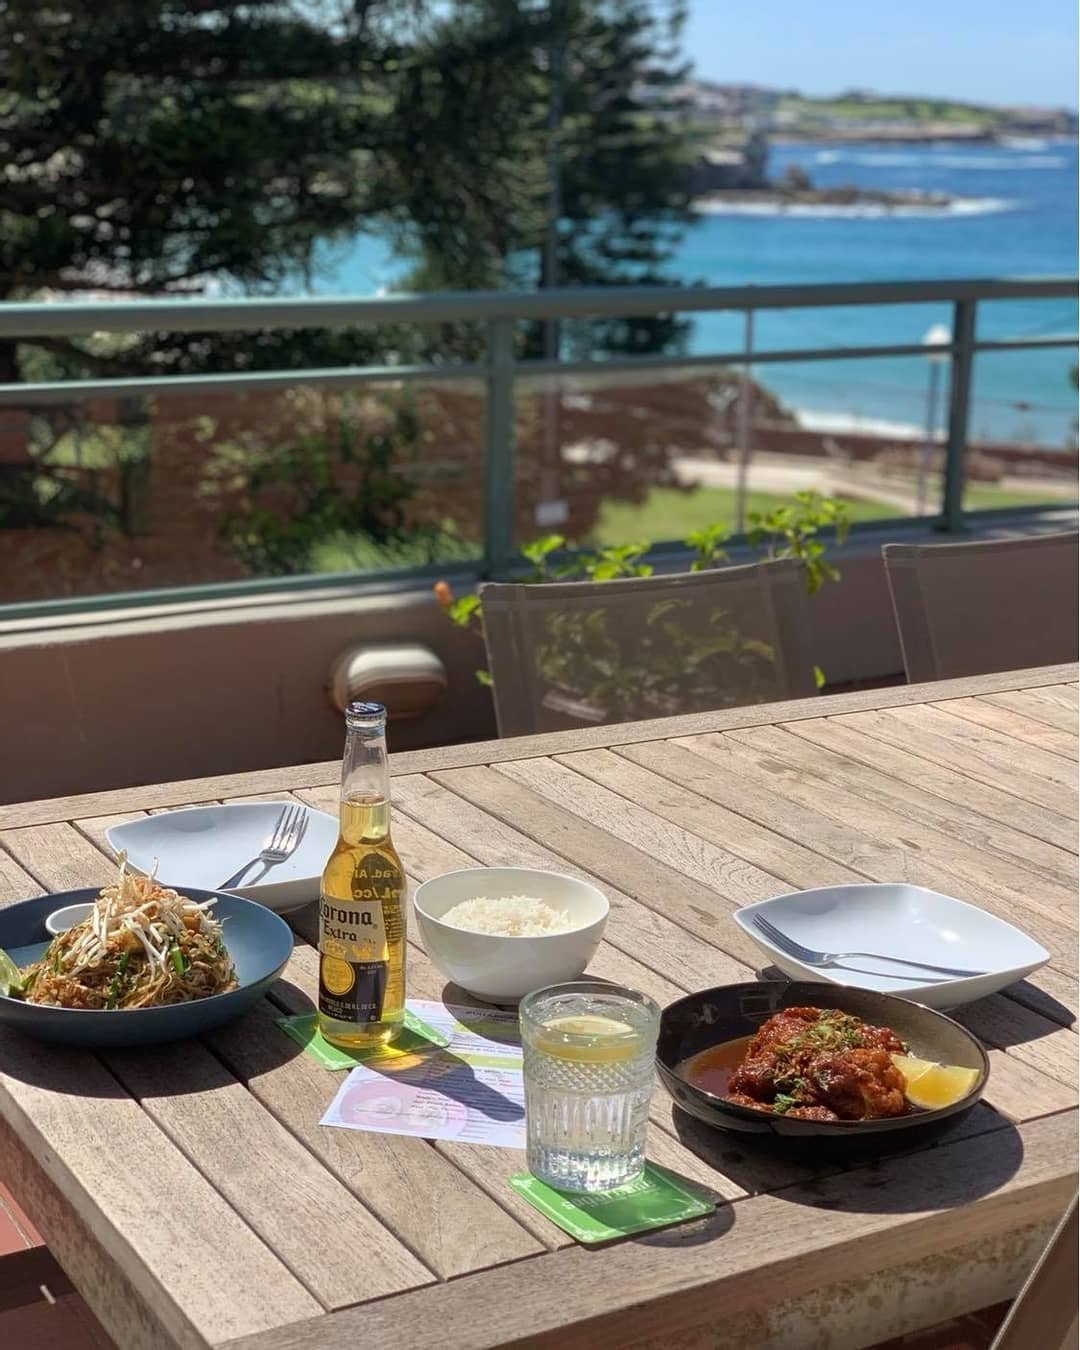 Lunch with a view...&nbsp;😍
At The Coogee View Beachfront Serviced Apartments, you can order your food delivery and enjoy the view on your balcony/terrace.
​We ordered a delicious lunch at @sugarcanecoogee to appreciate this ocean view! It tastes as